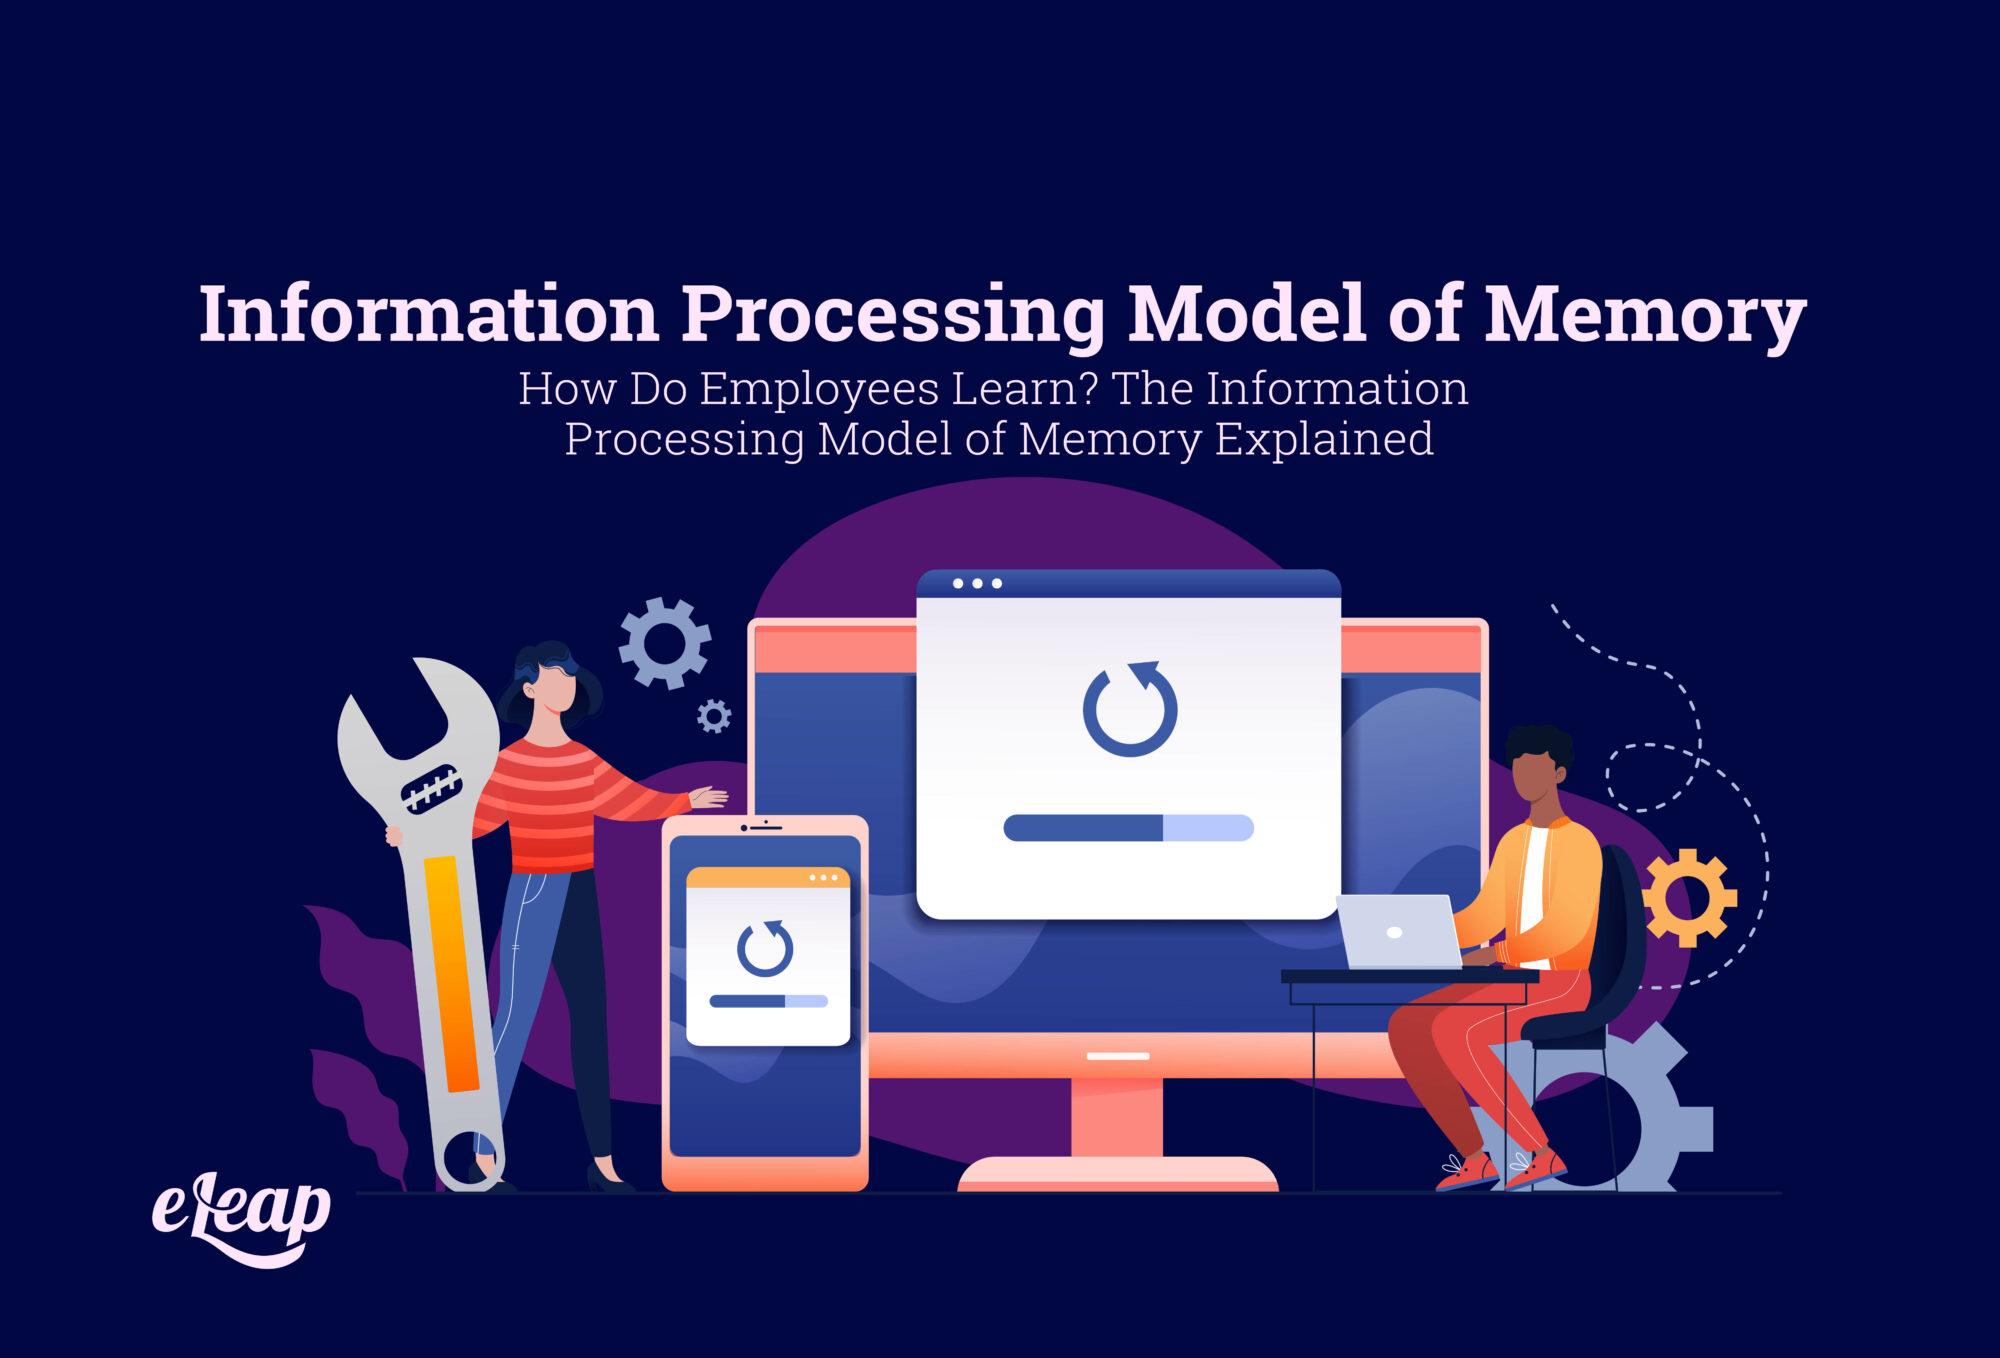 Information Processing Model of Memory